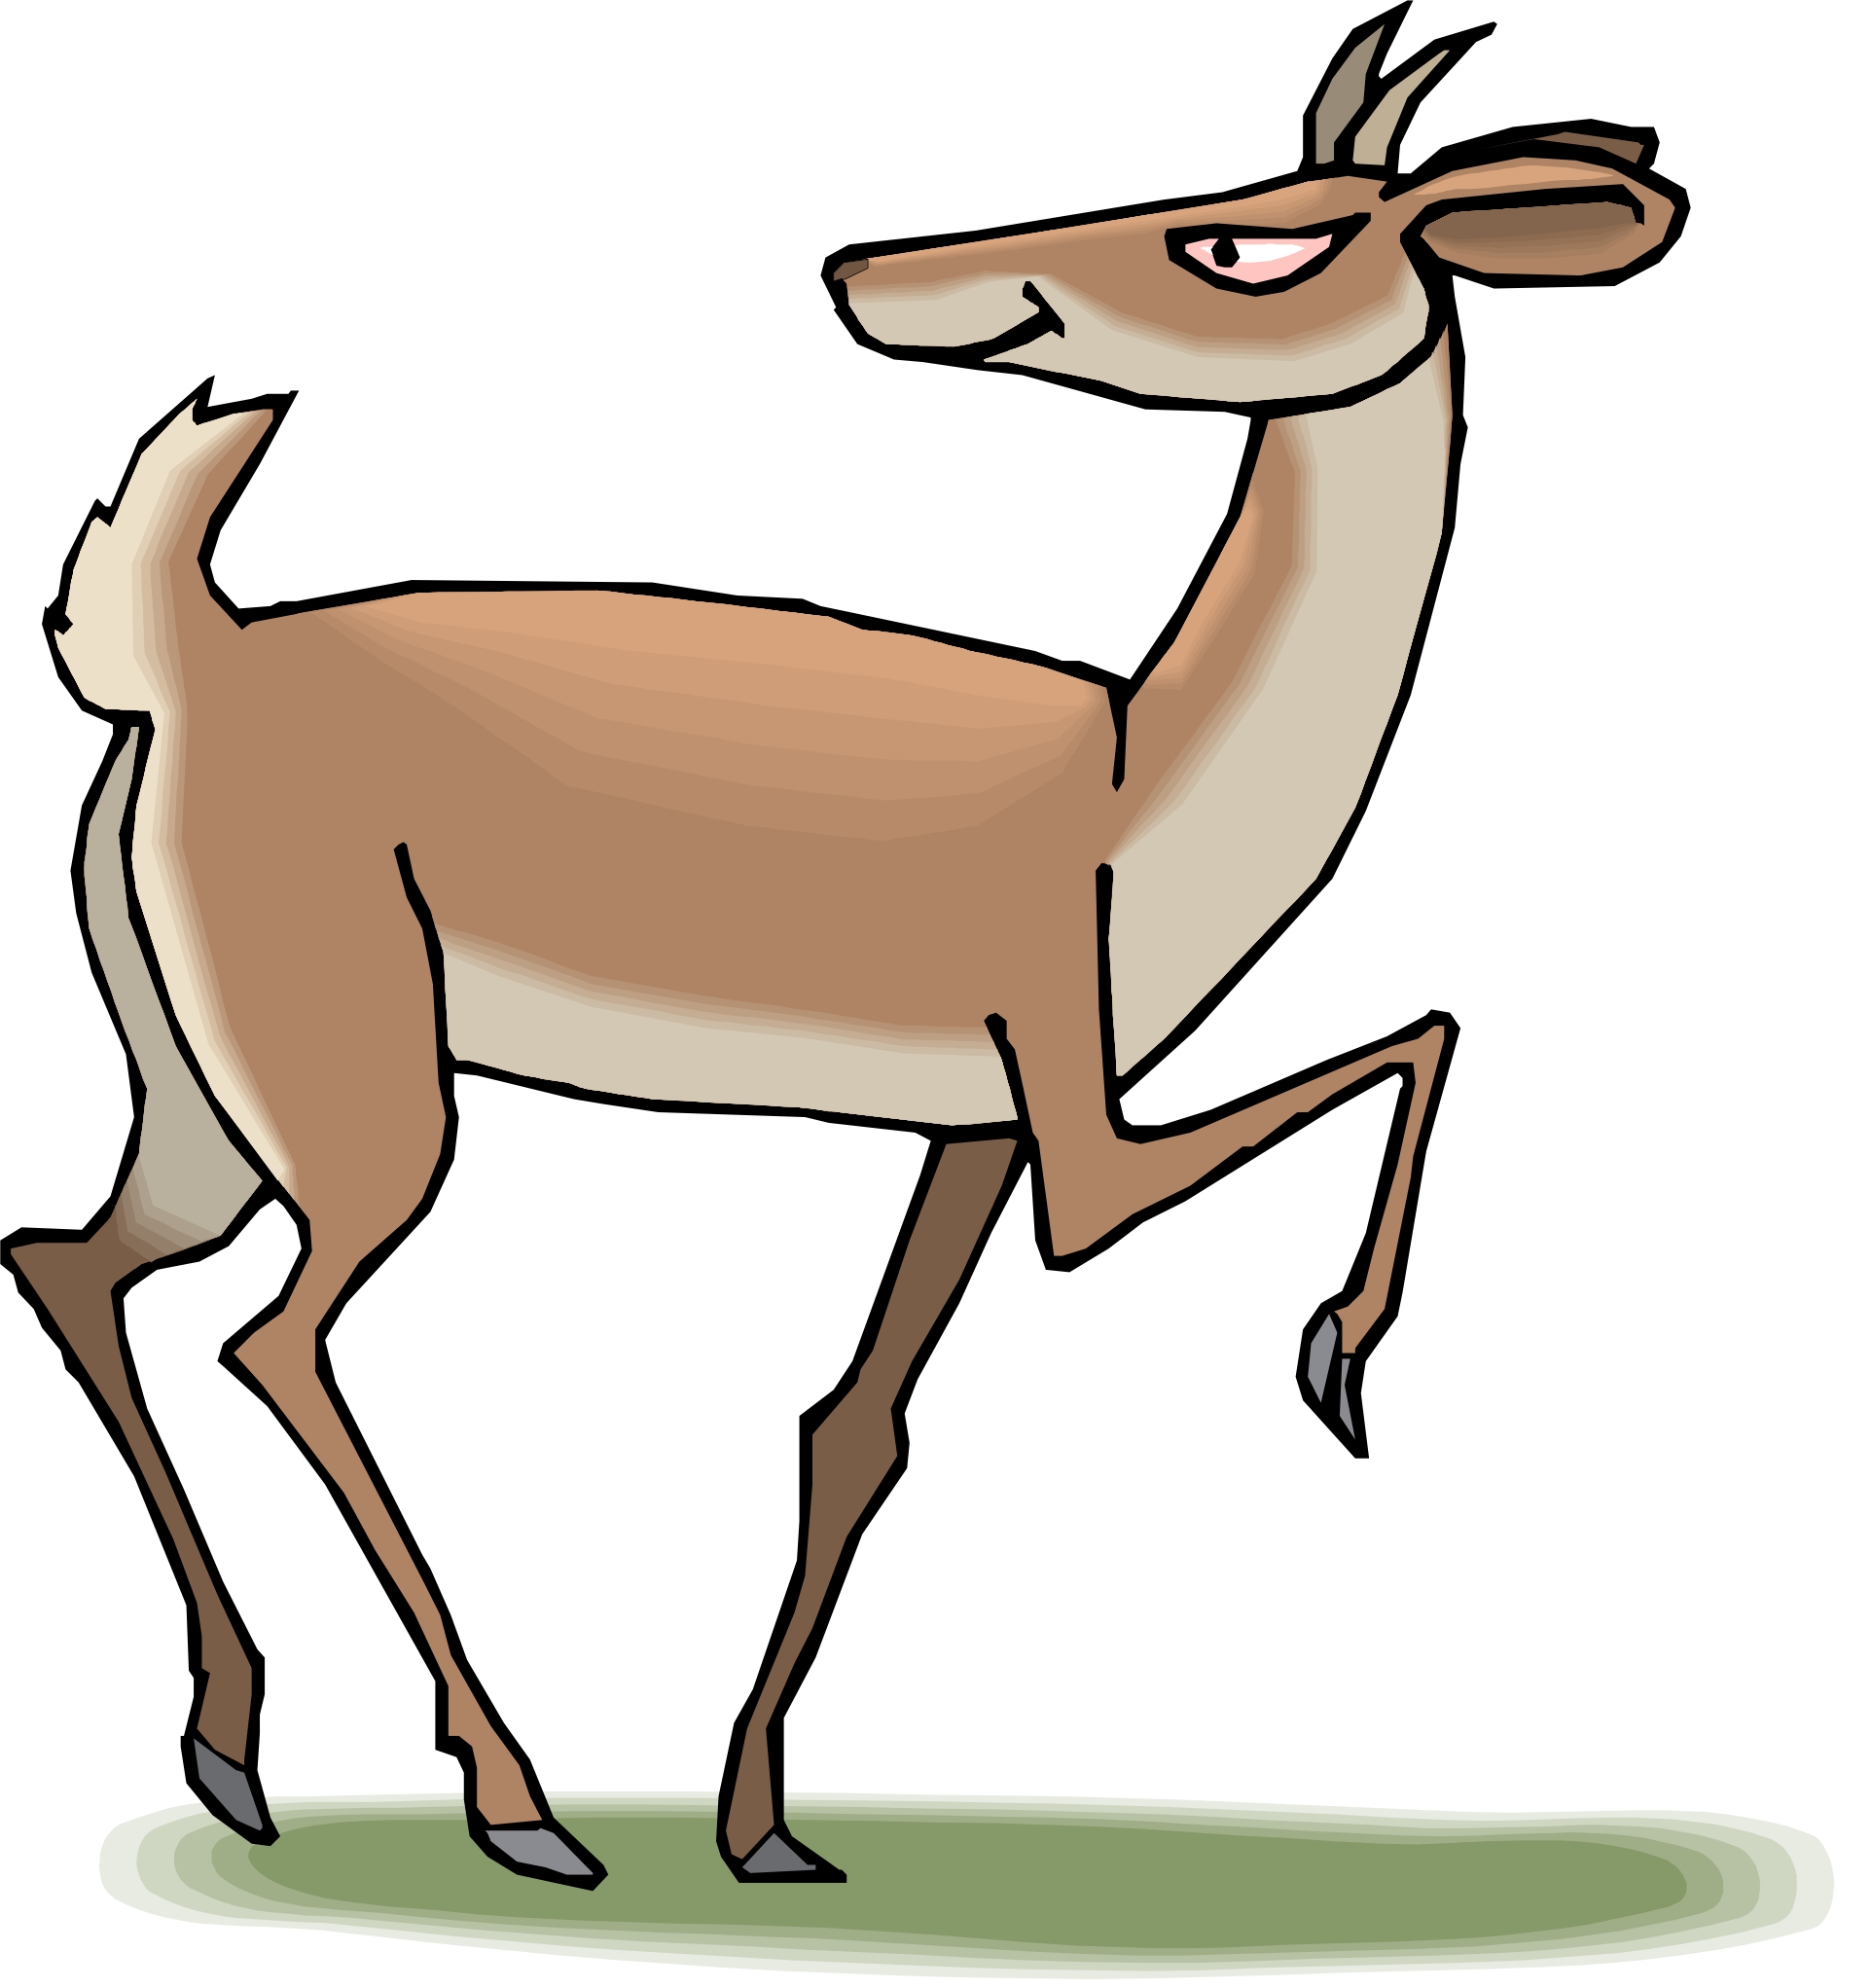 Clip Arts Related To : caribou png. view all Walking Deer Cliparts). 